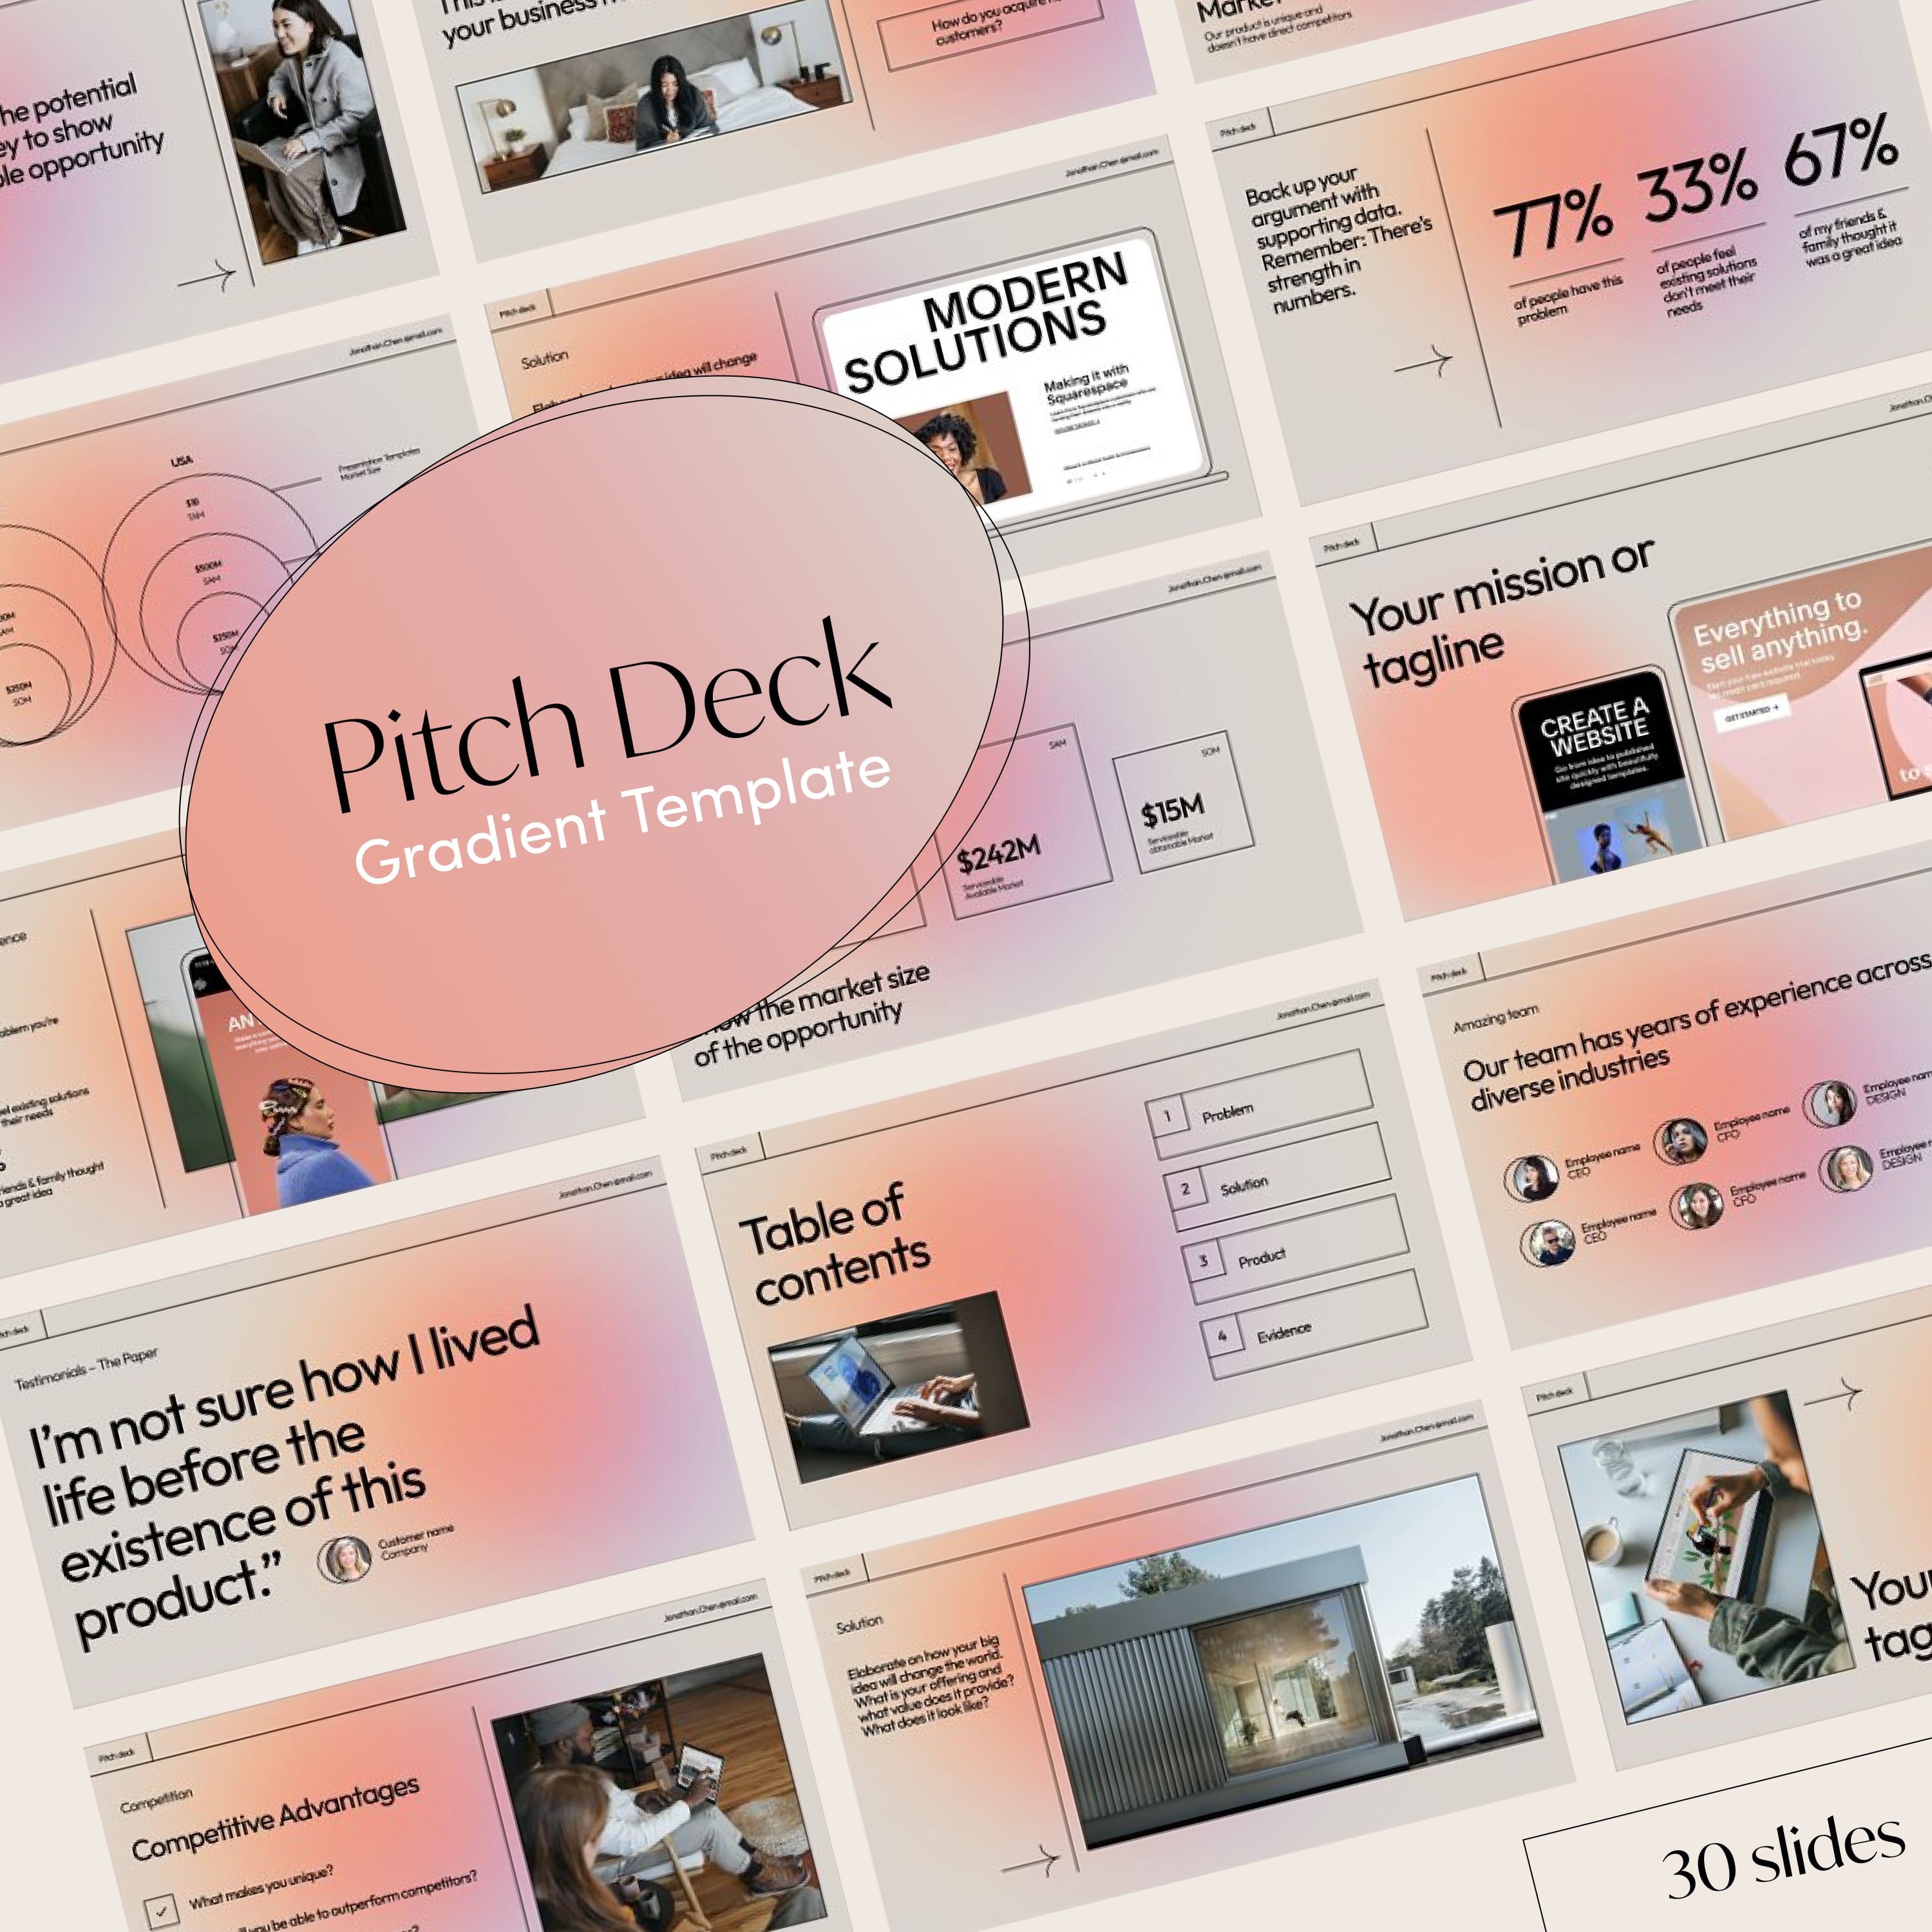 Pitch Deck - Gradient cover.